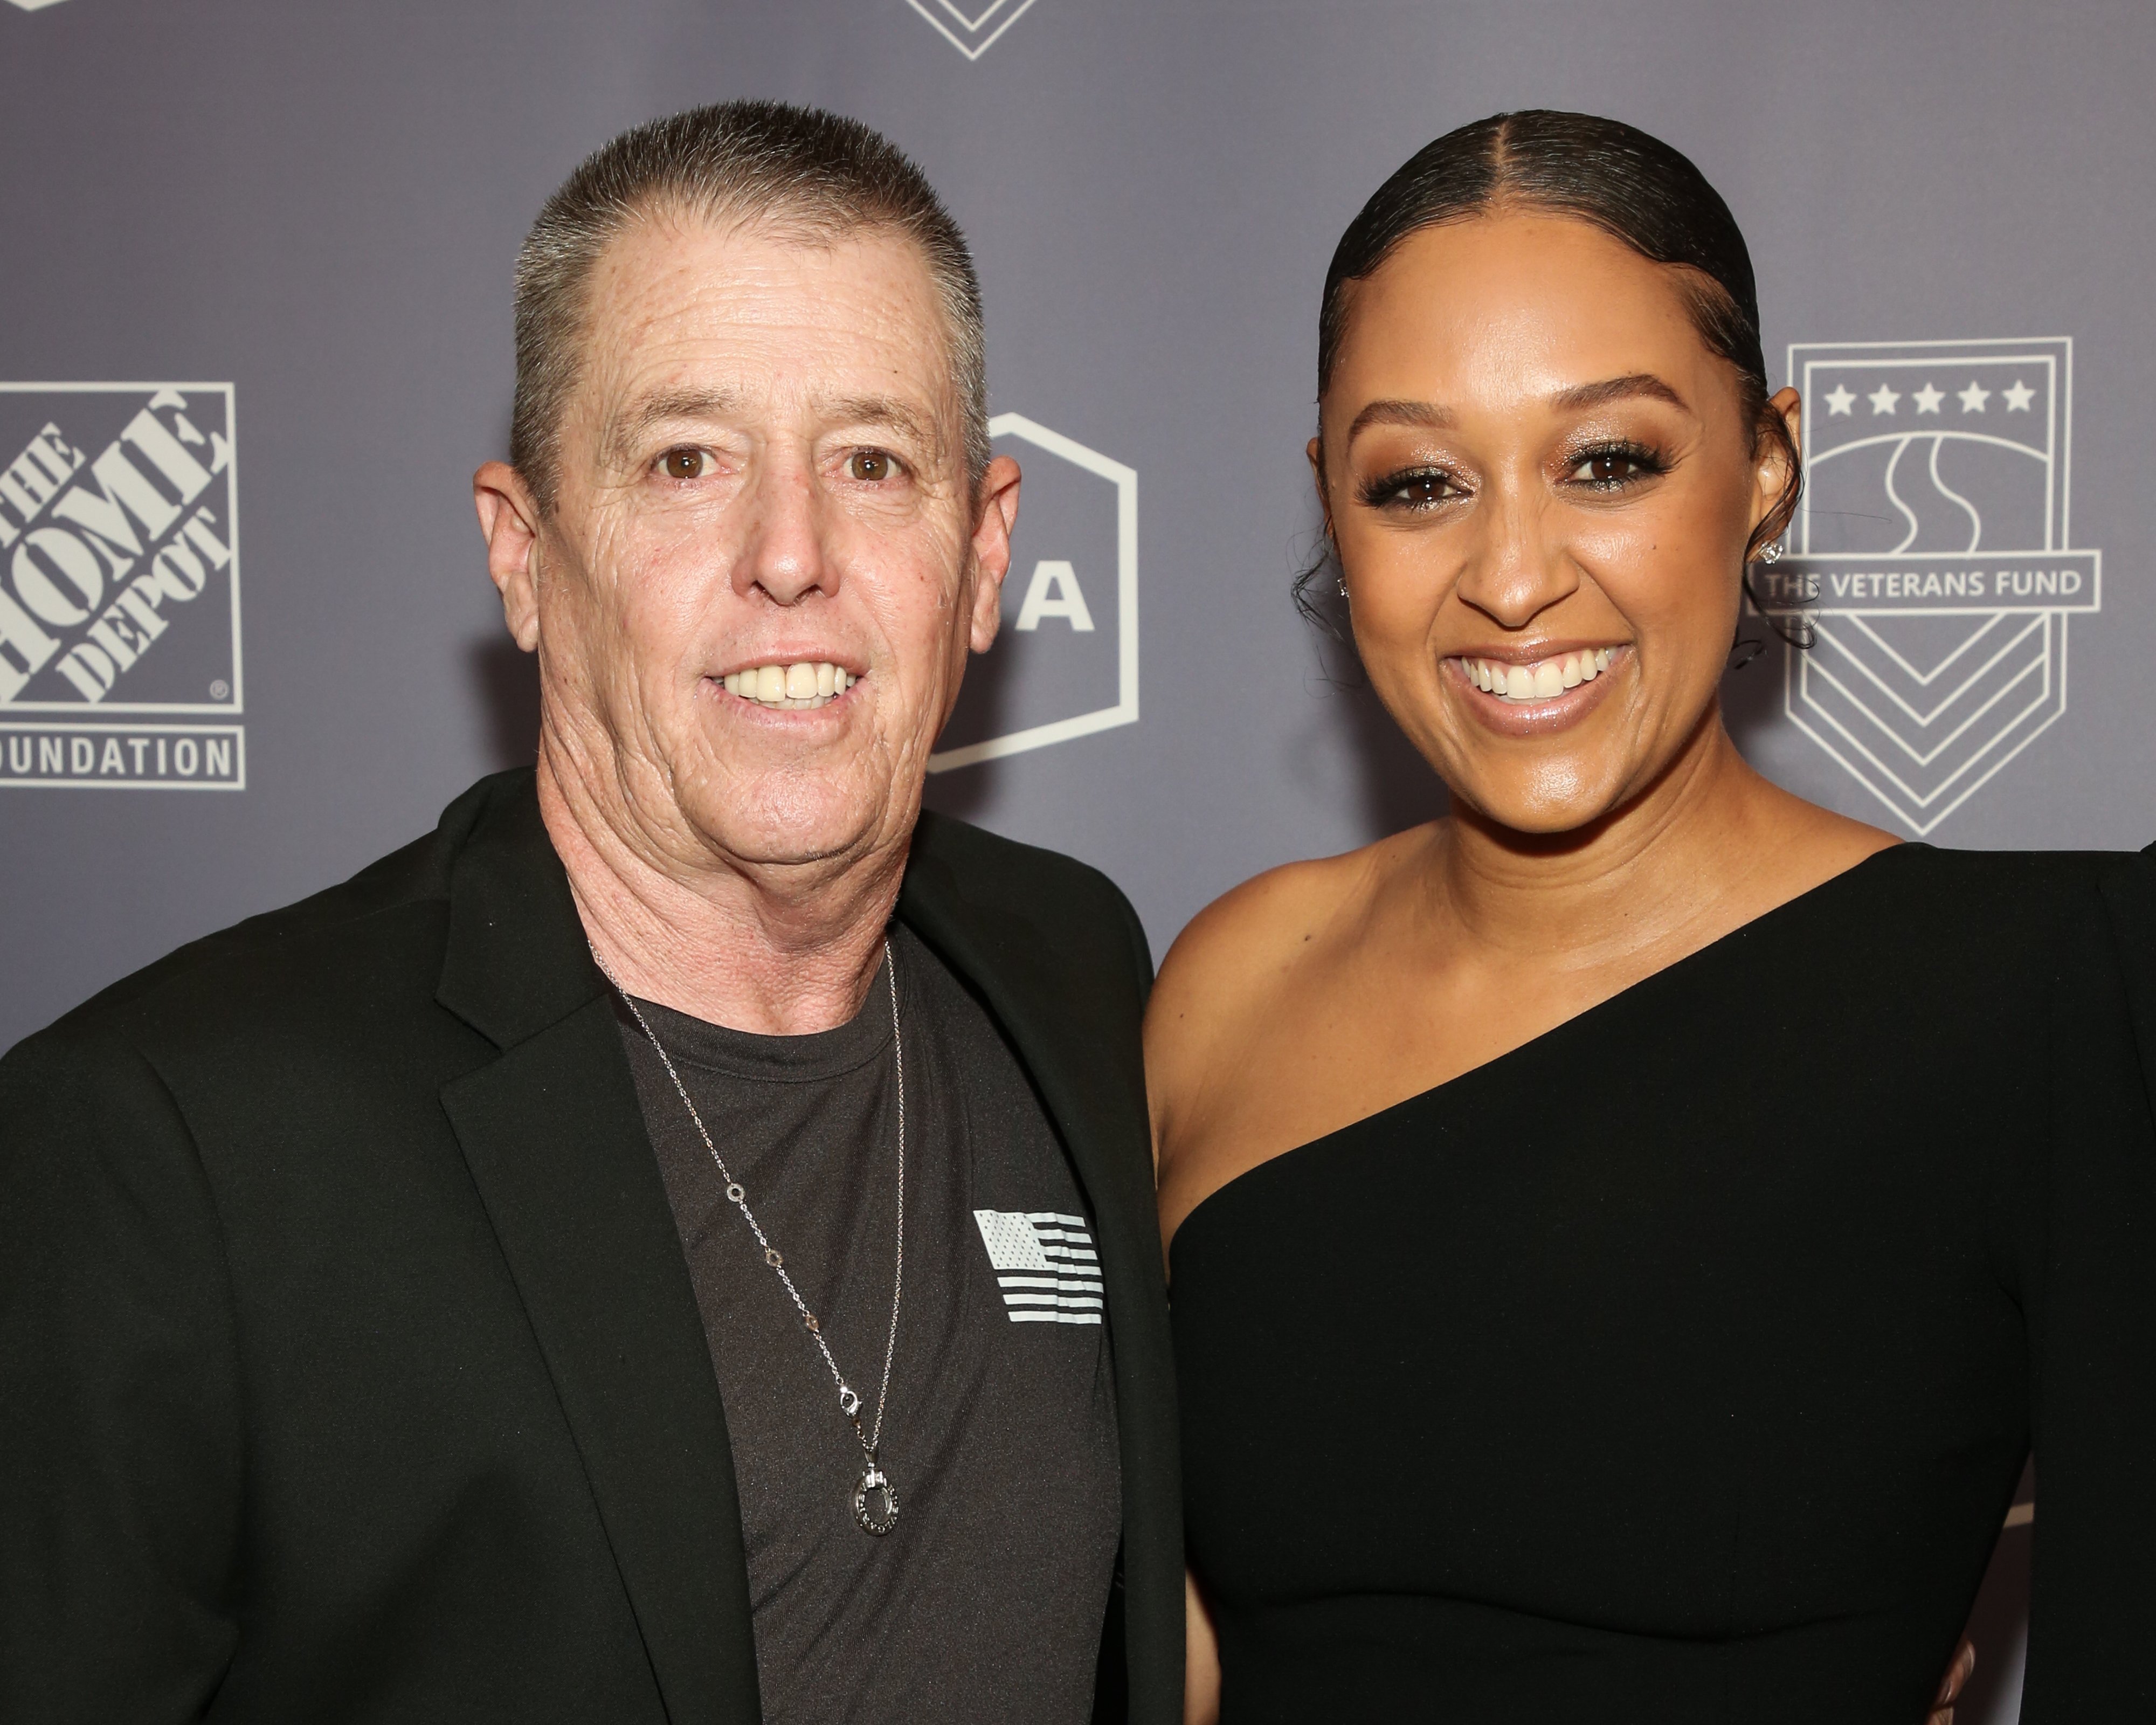 Tia Mowry and her father Timothy Mowry at the 2019 U.S. Vets Salute Gala on November 5, 2019, in Beverly Hills, California. | Source: Getty Images